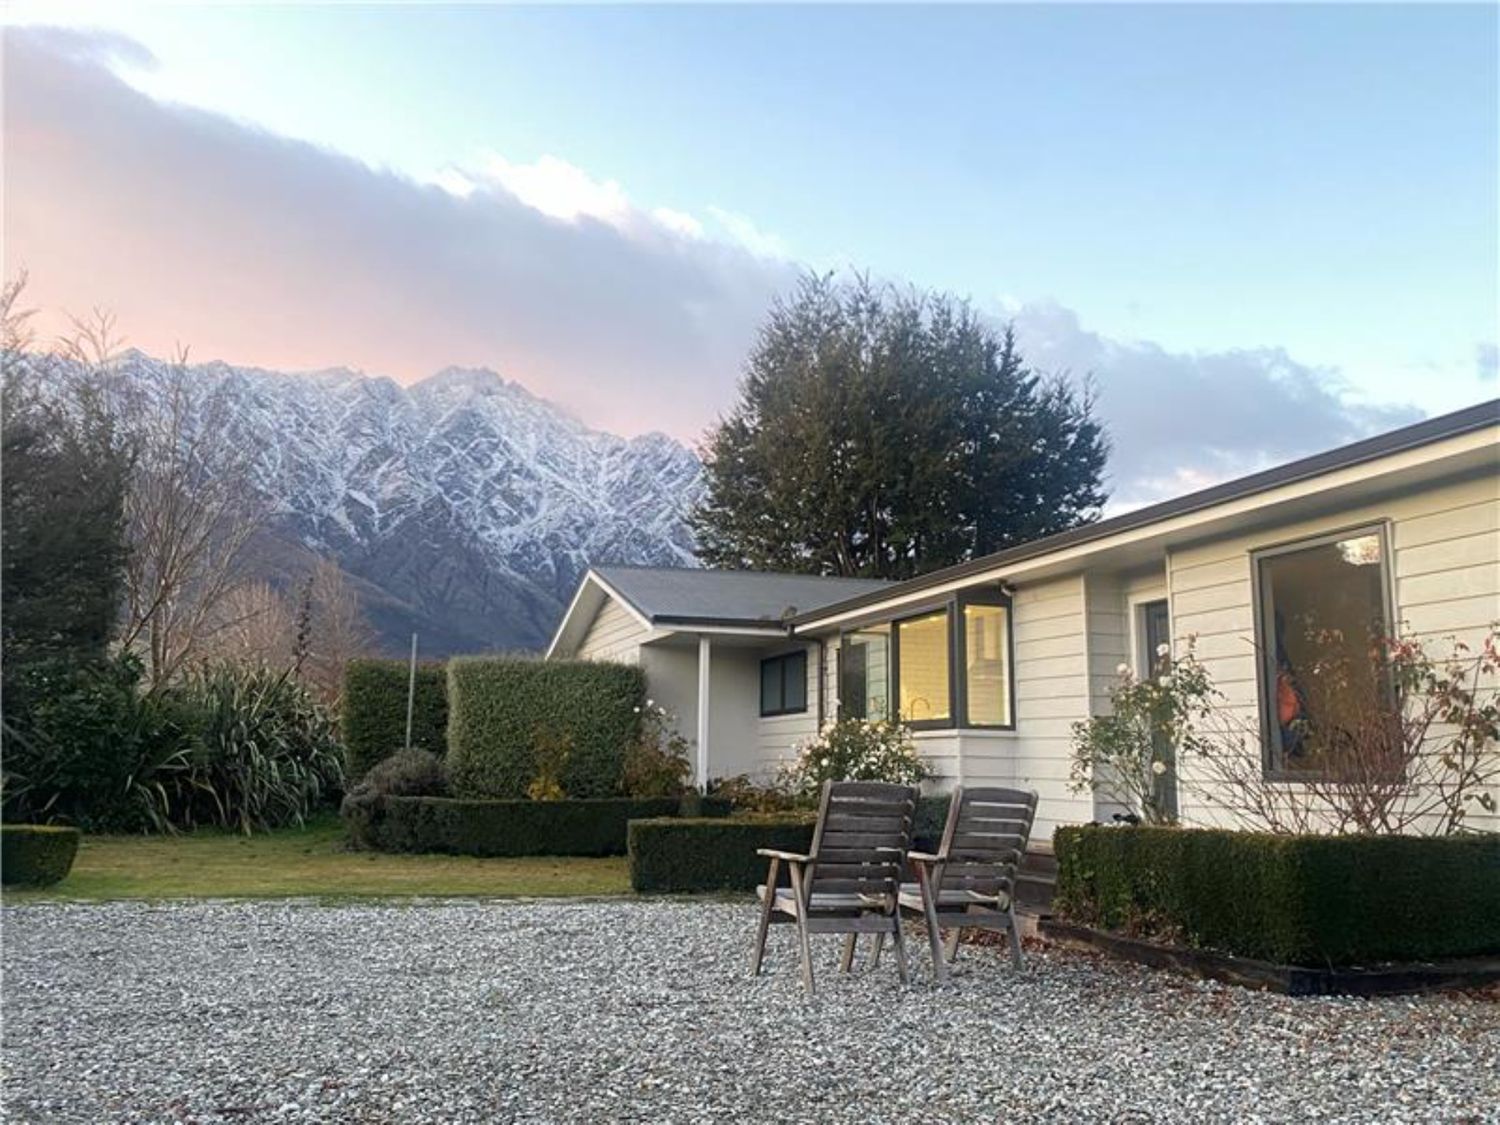 Frankton Favourite - Queenstown Holiday Home -  - 1138025 - photo 1